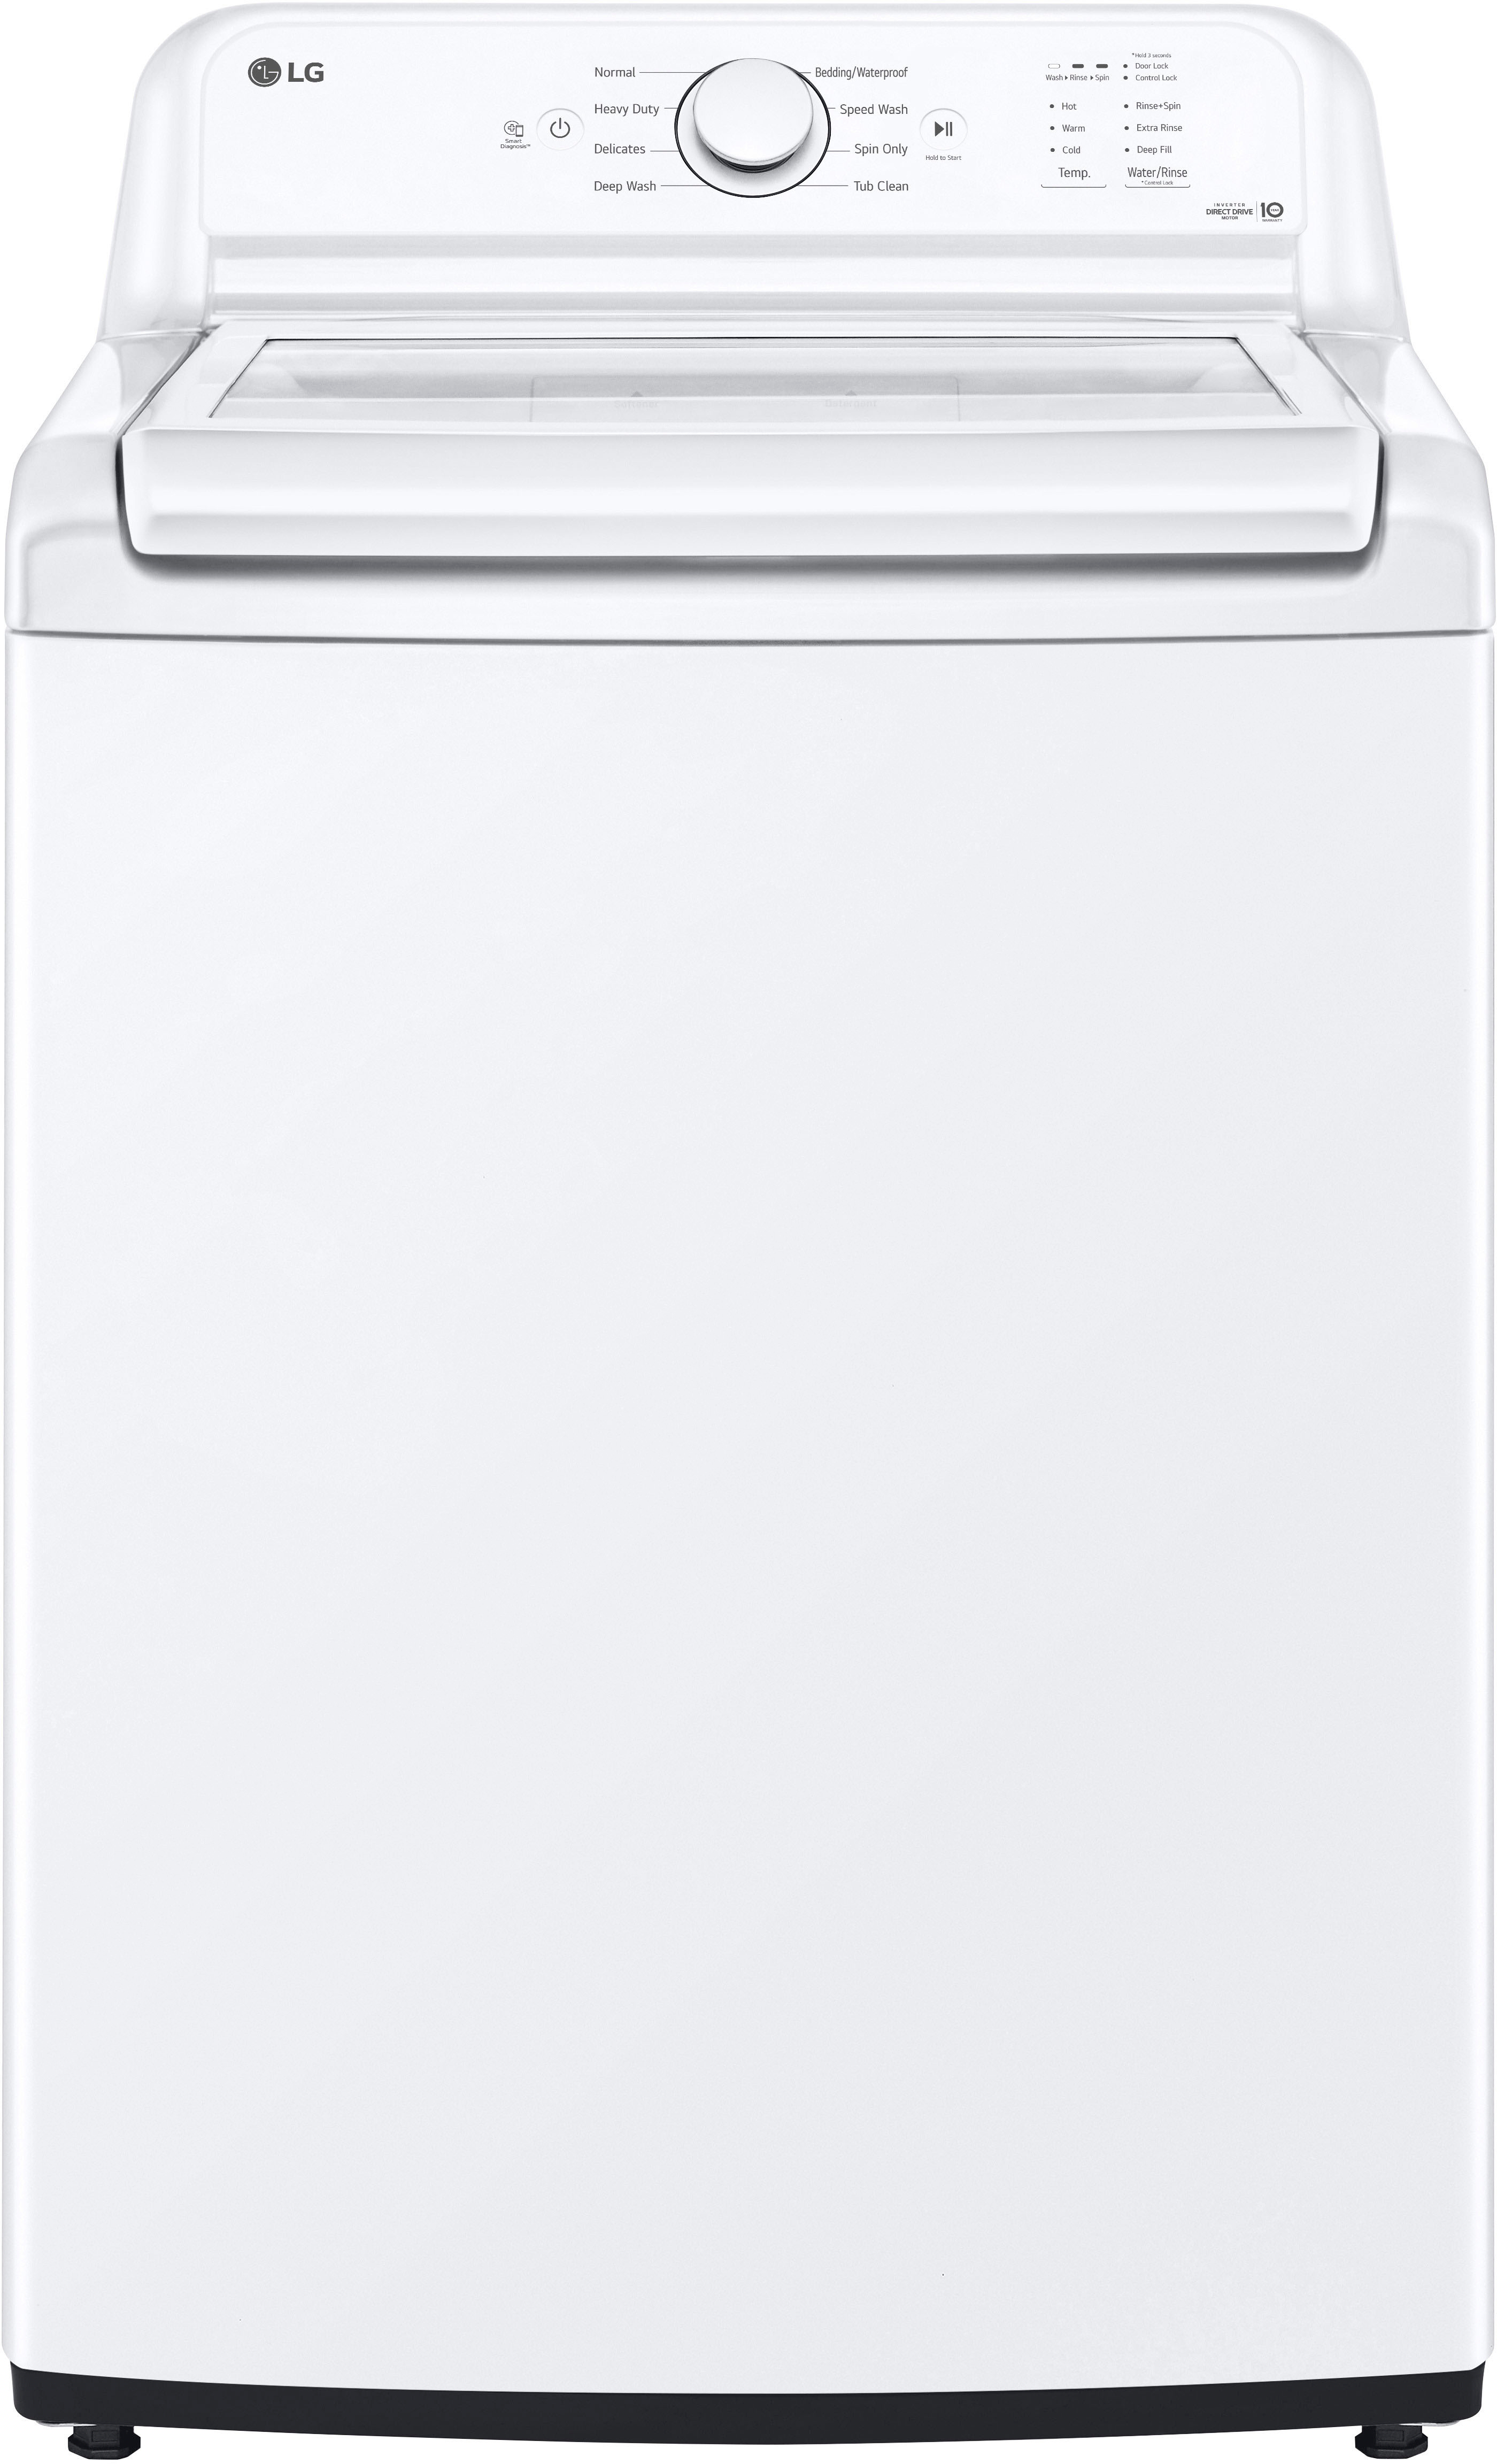 Lid Washer Cu. White SlamProof Glass Ft. with 4.1 Buy Best Top - WT6105CW Load LG